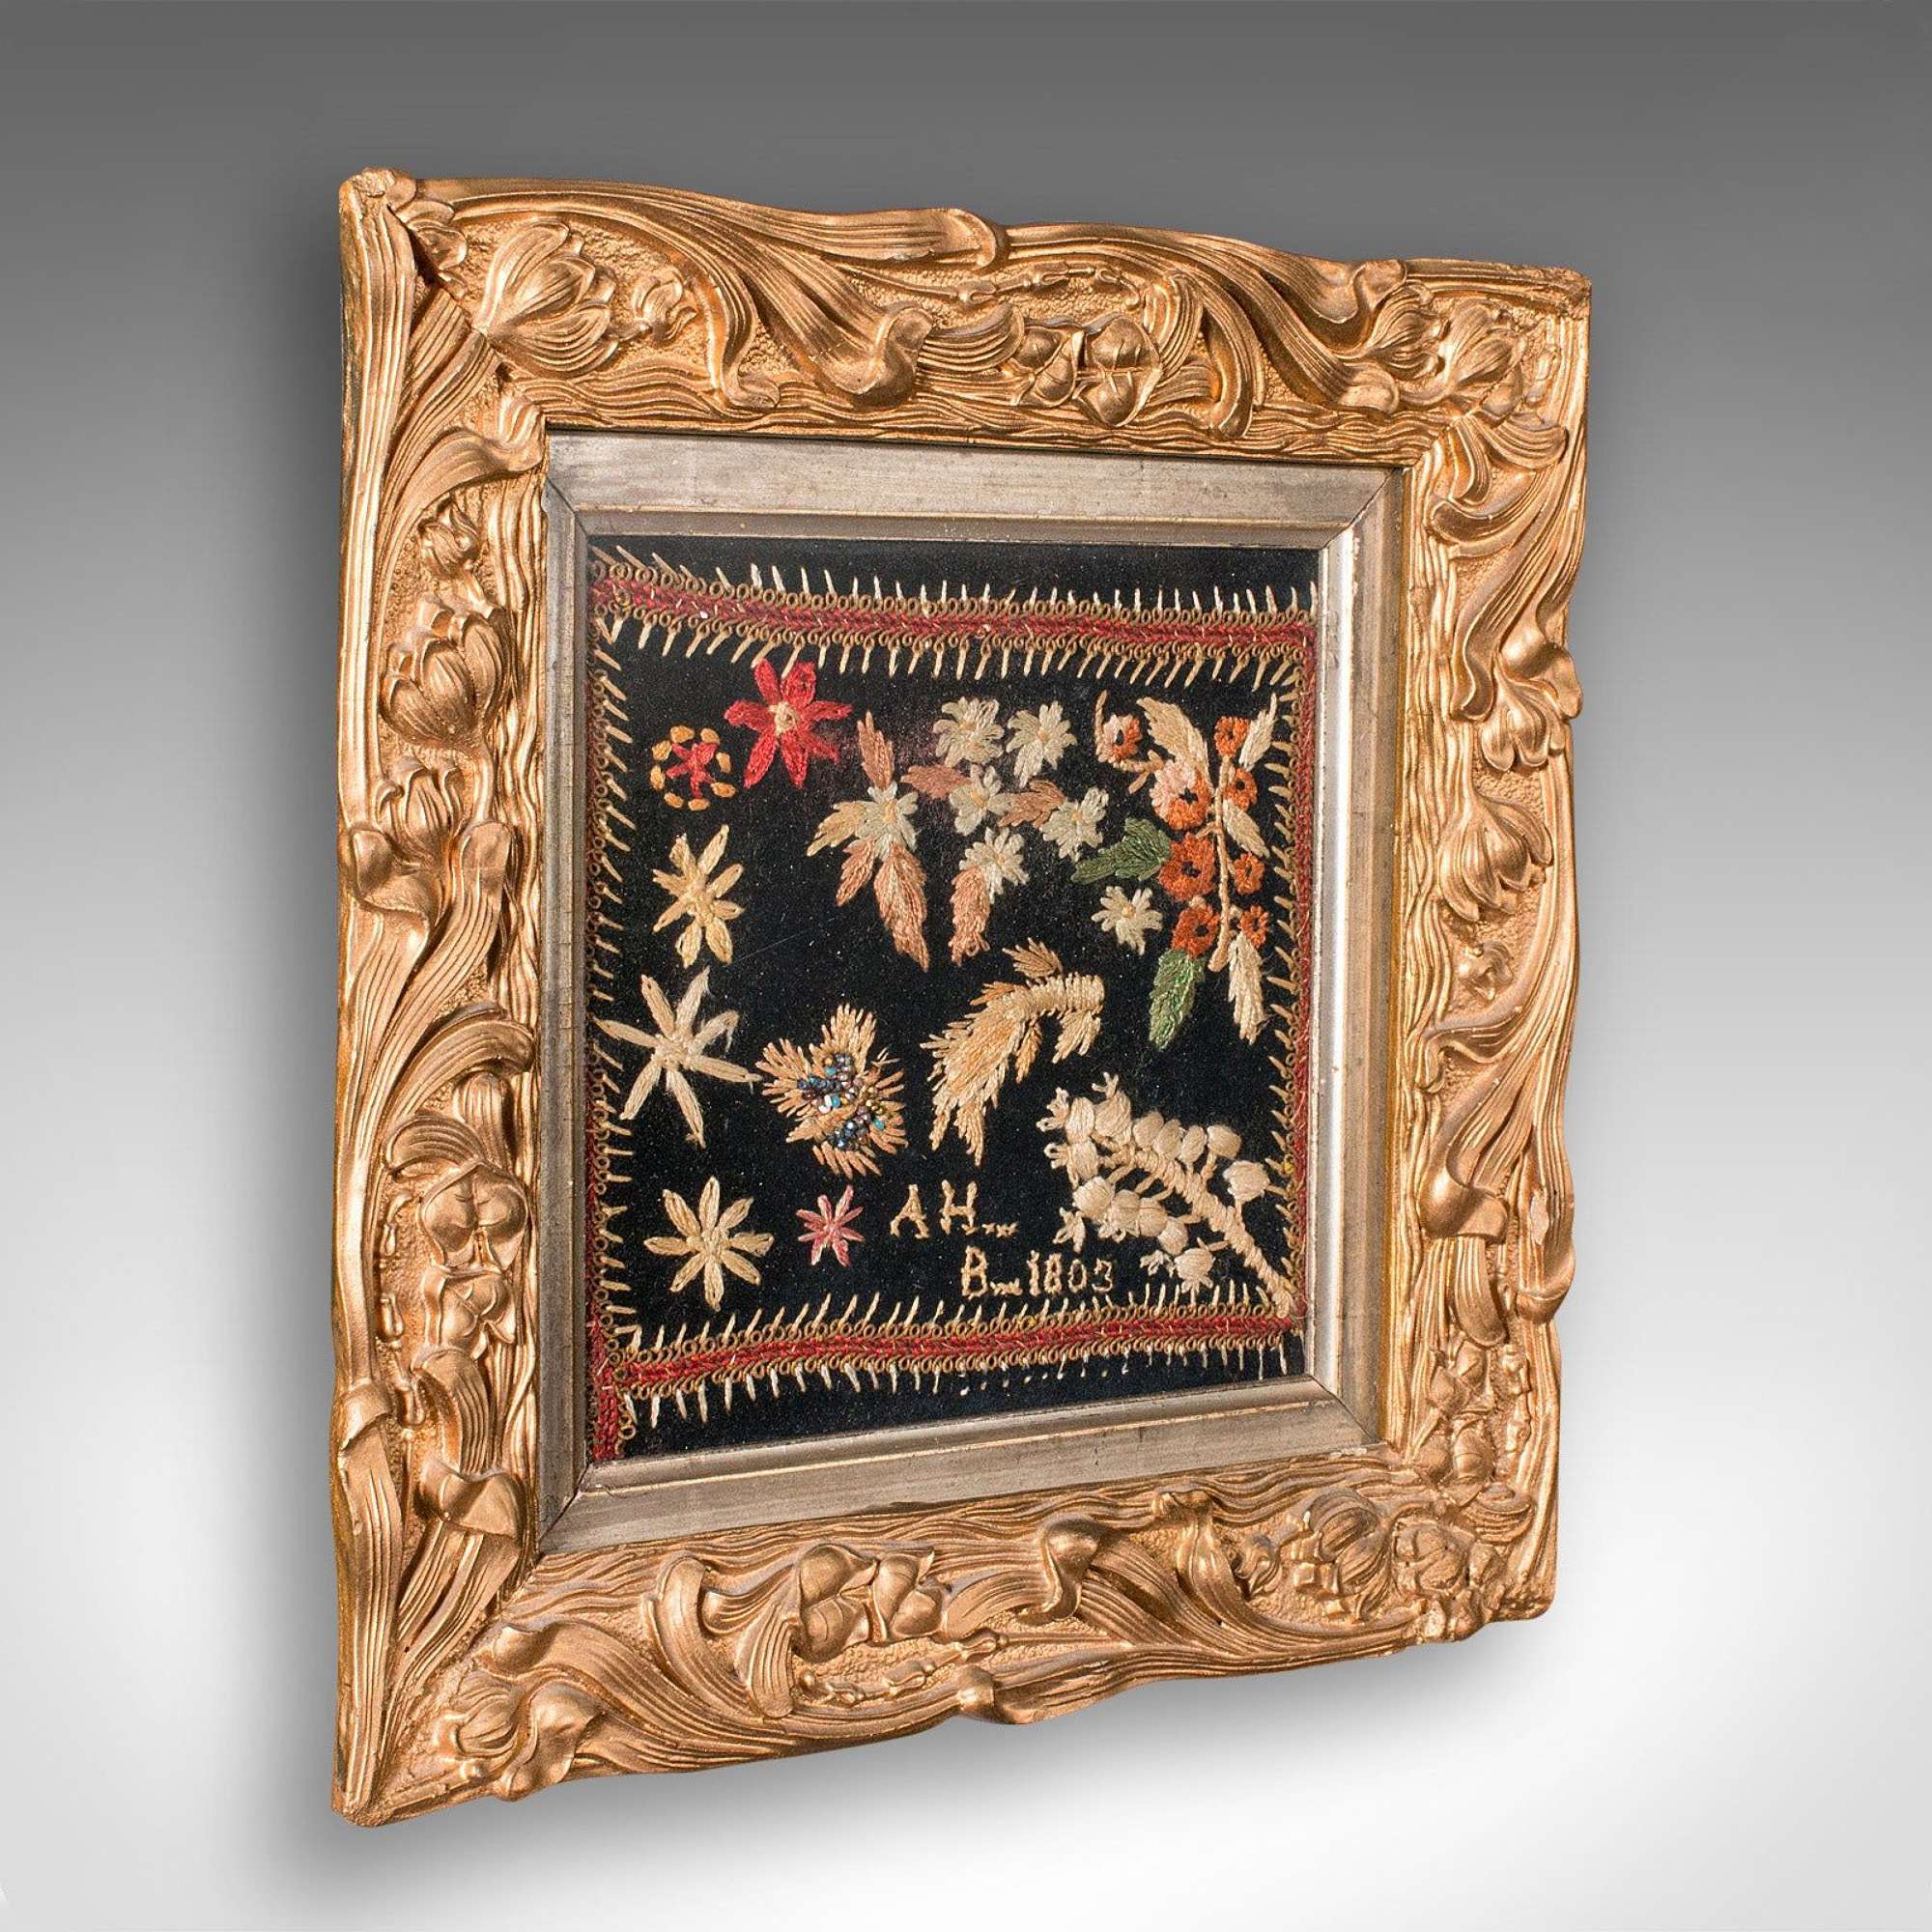 Small Antique Framed Embroidered Sampler, English, Needlepoint, Georgian, C.1800